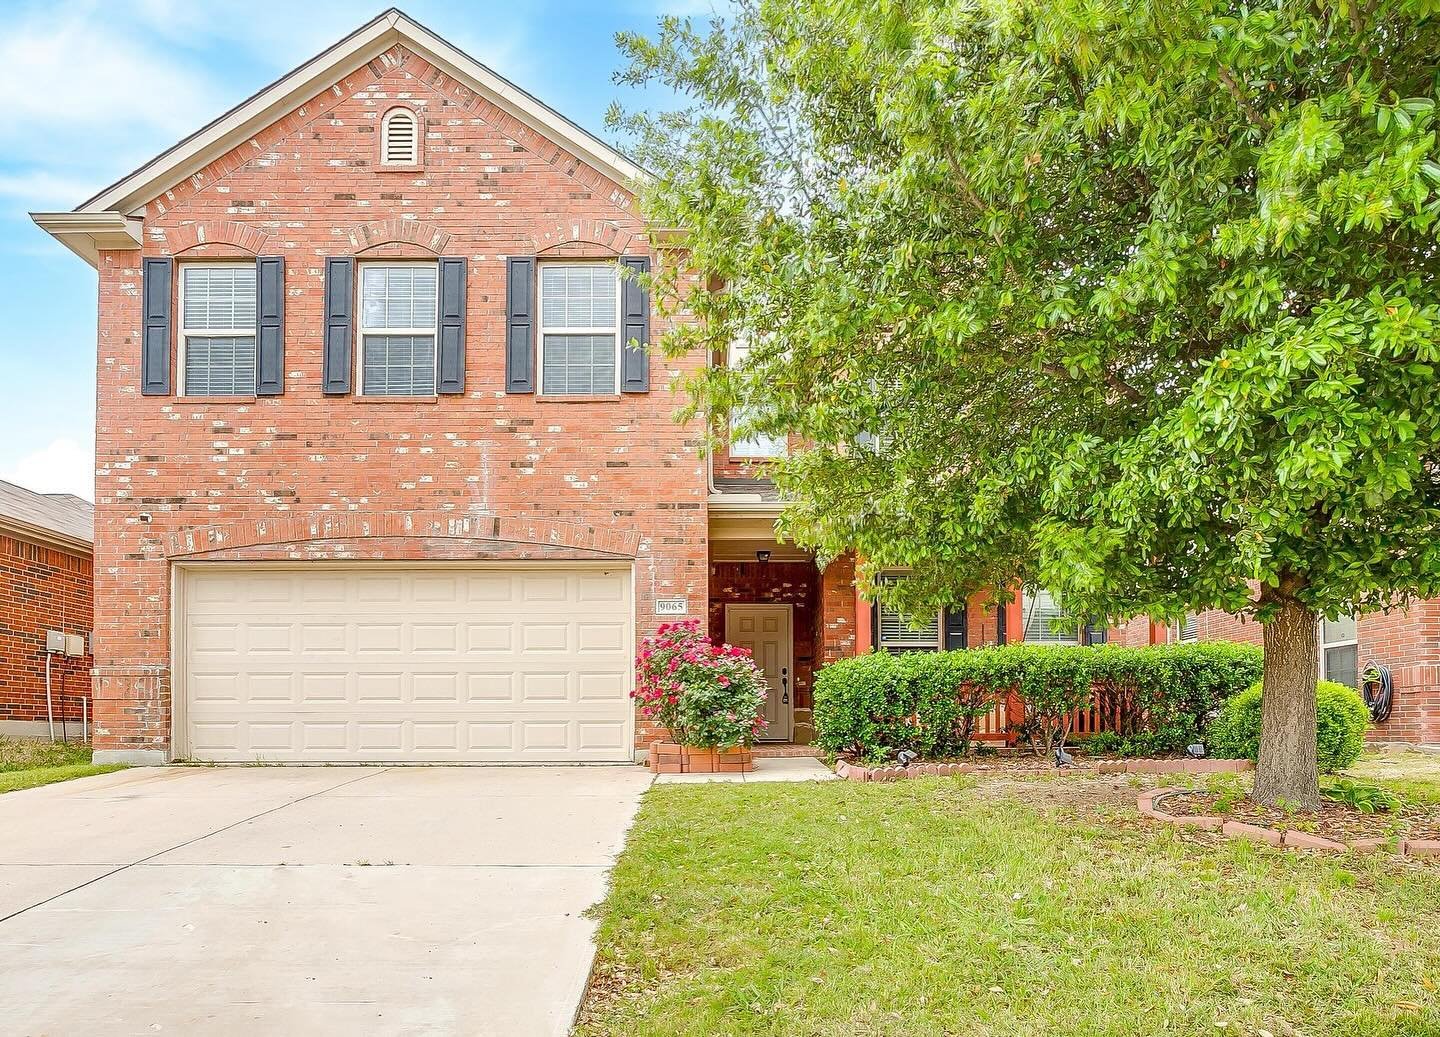 Don&rsquo;t miss out on this updated two-story brick home! With 5 bedrooms featuring new carpet, a downstairs office, plus versatile spaces and a media room, there&rsquo;s room for everyone. Located in the esteemed Keller ISD, this move-in-ready gem 